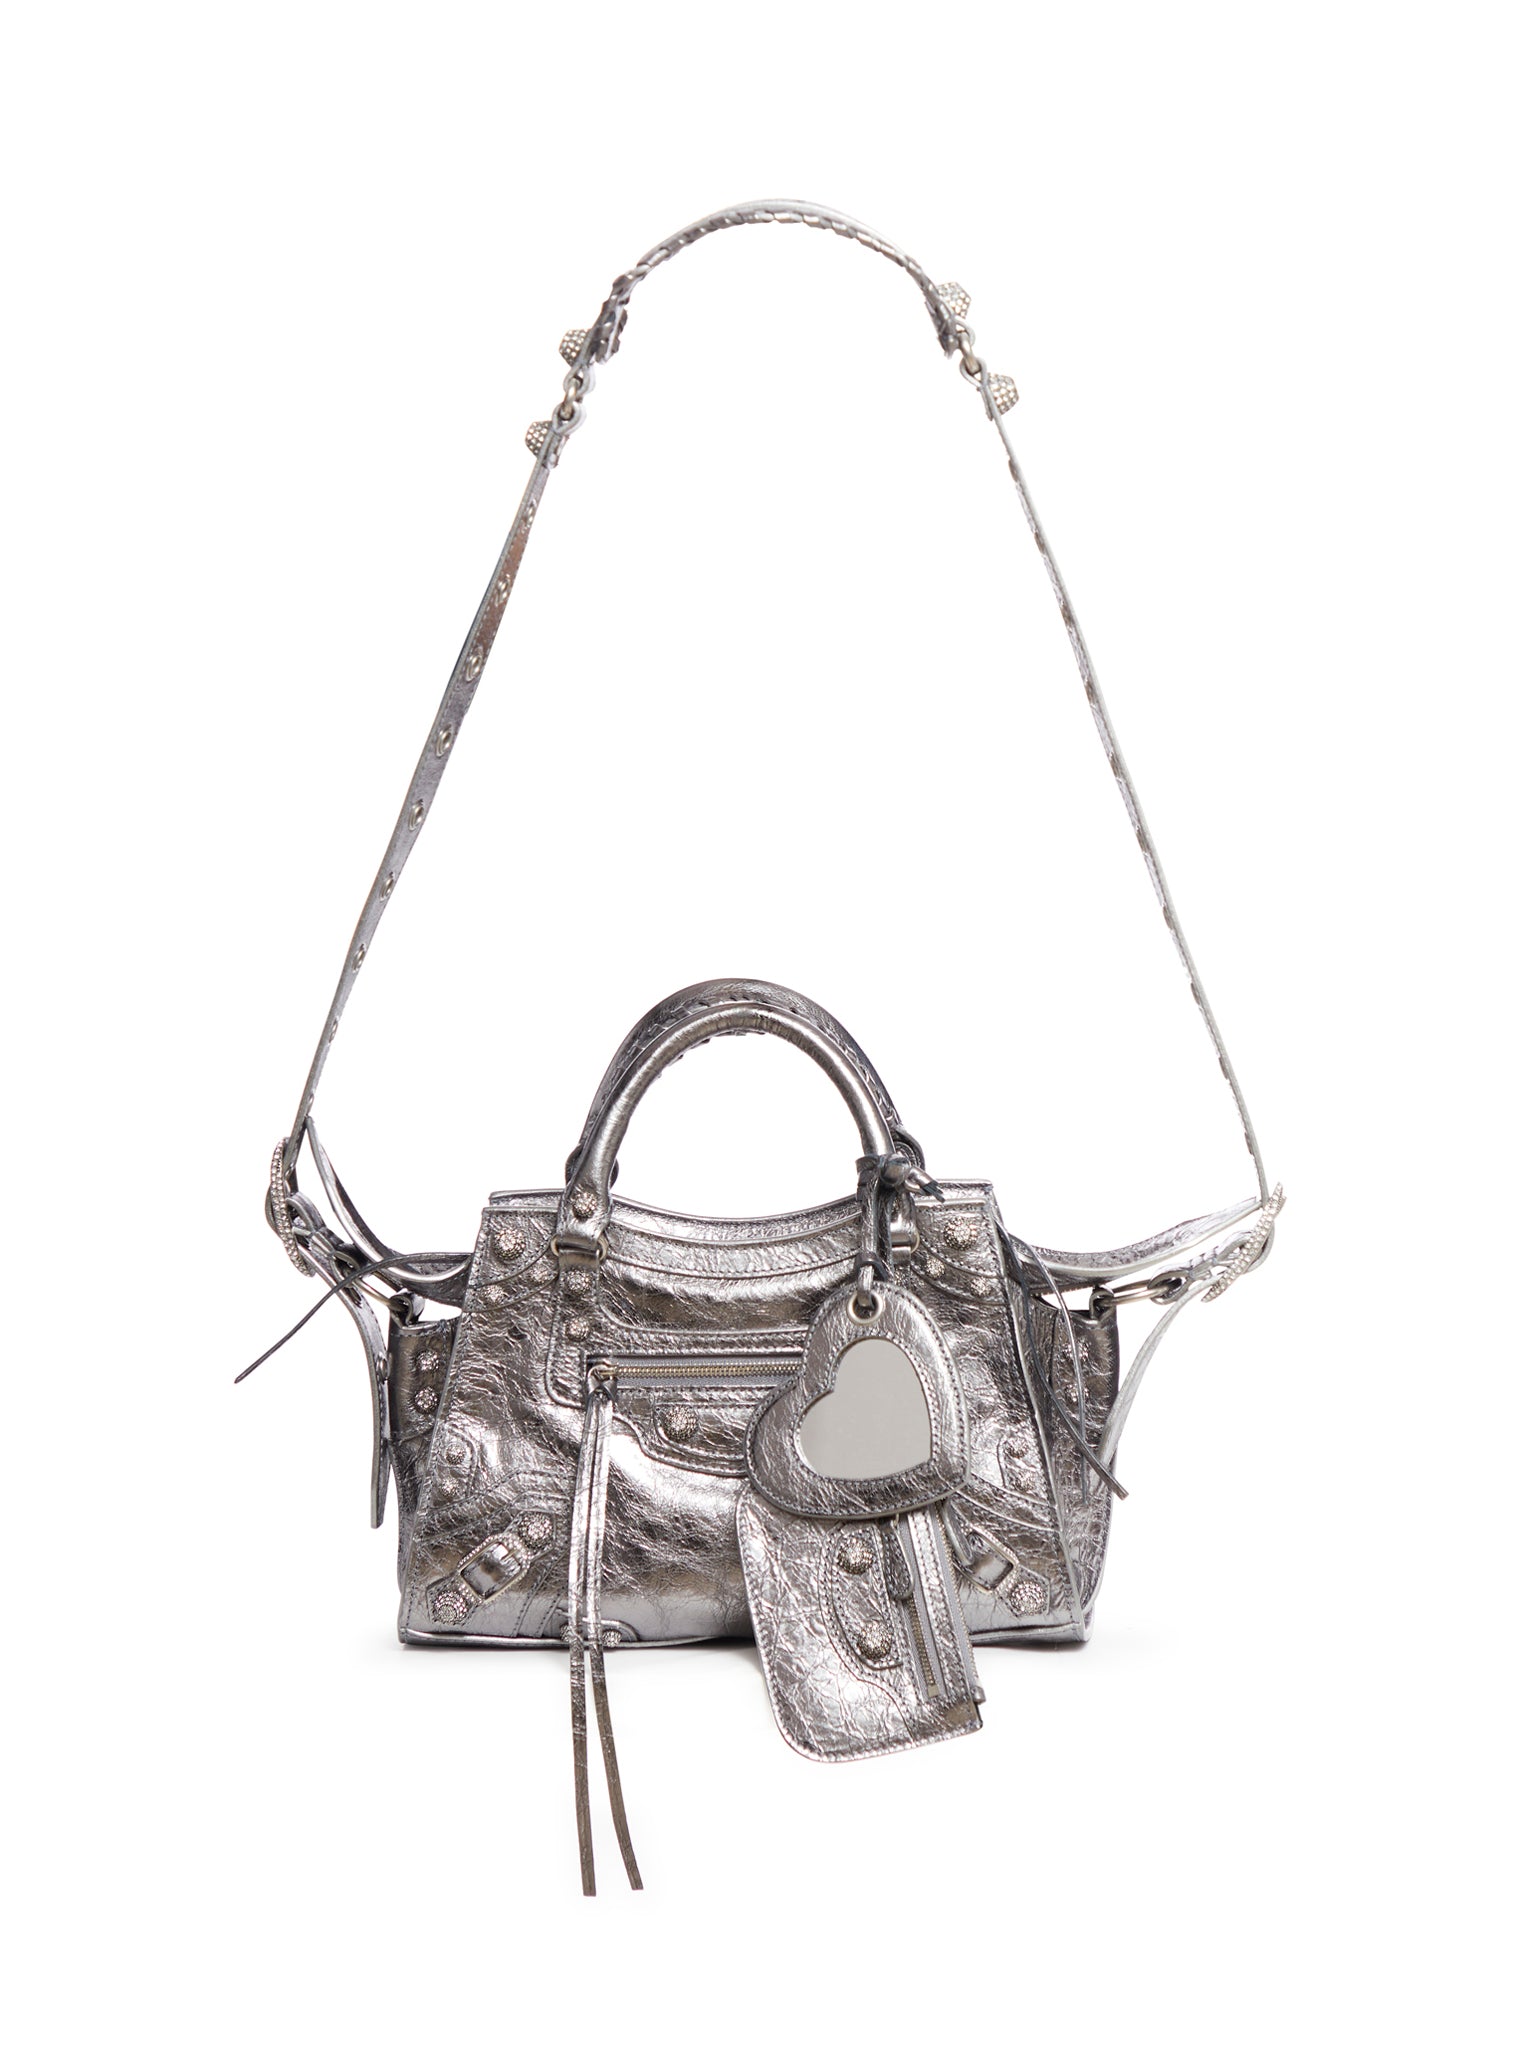 NEO CAGOLE XS METALLIC BAG FOR WOMEN IN SILVER